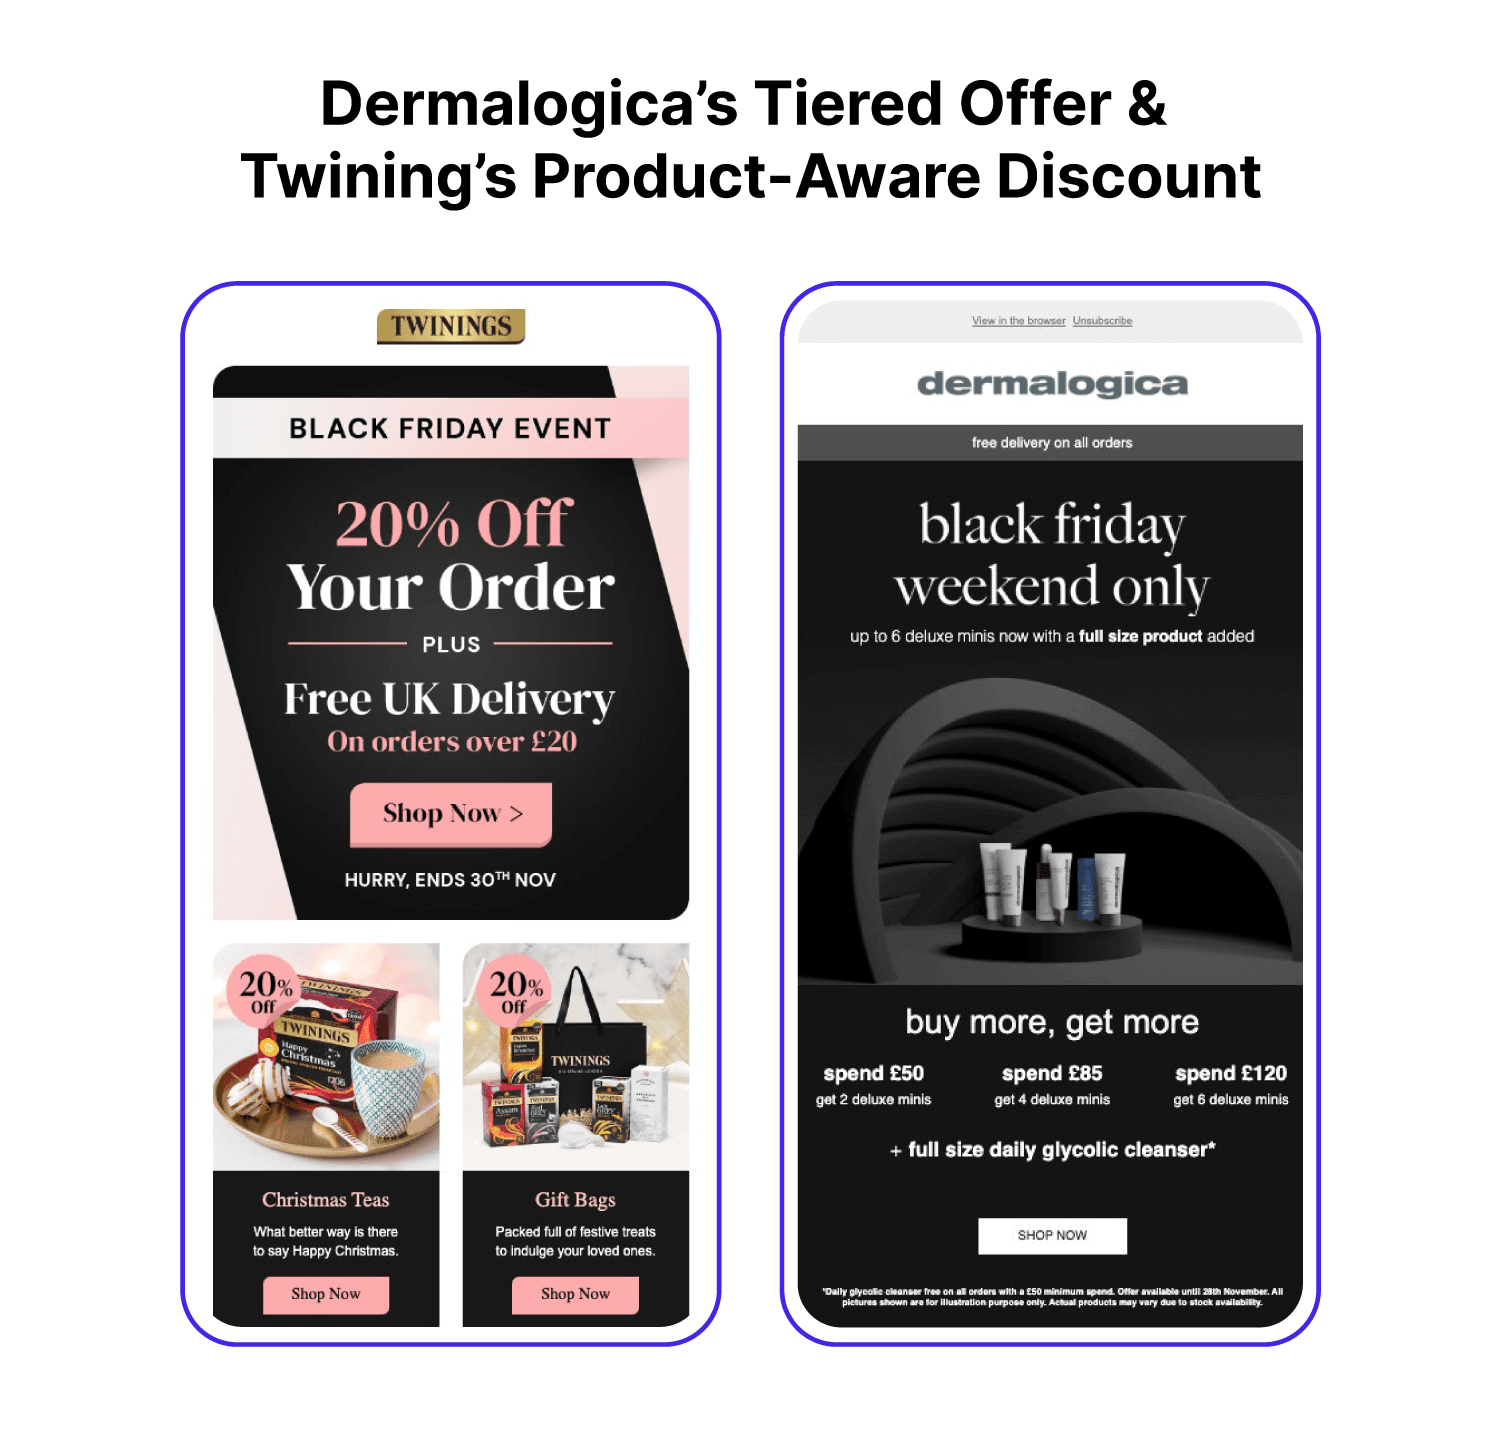 Dermalogica's Tiered Offer & Twining's Product Aware Discount